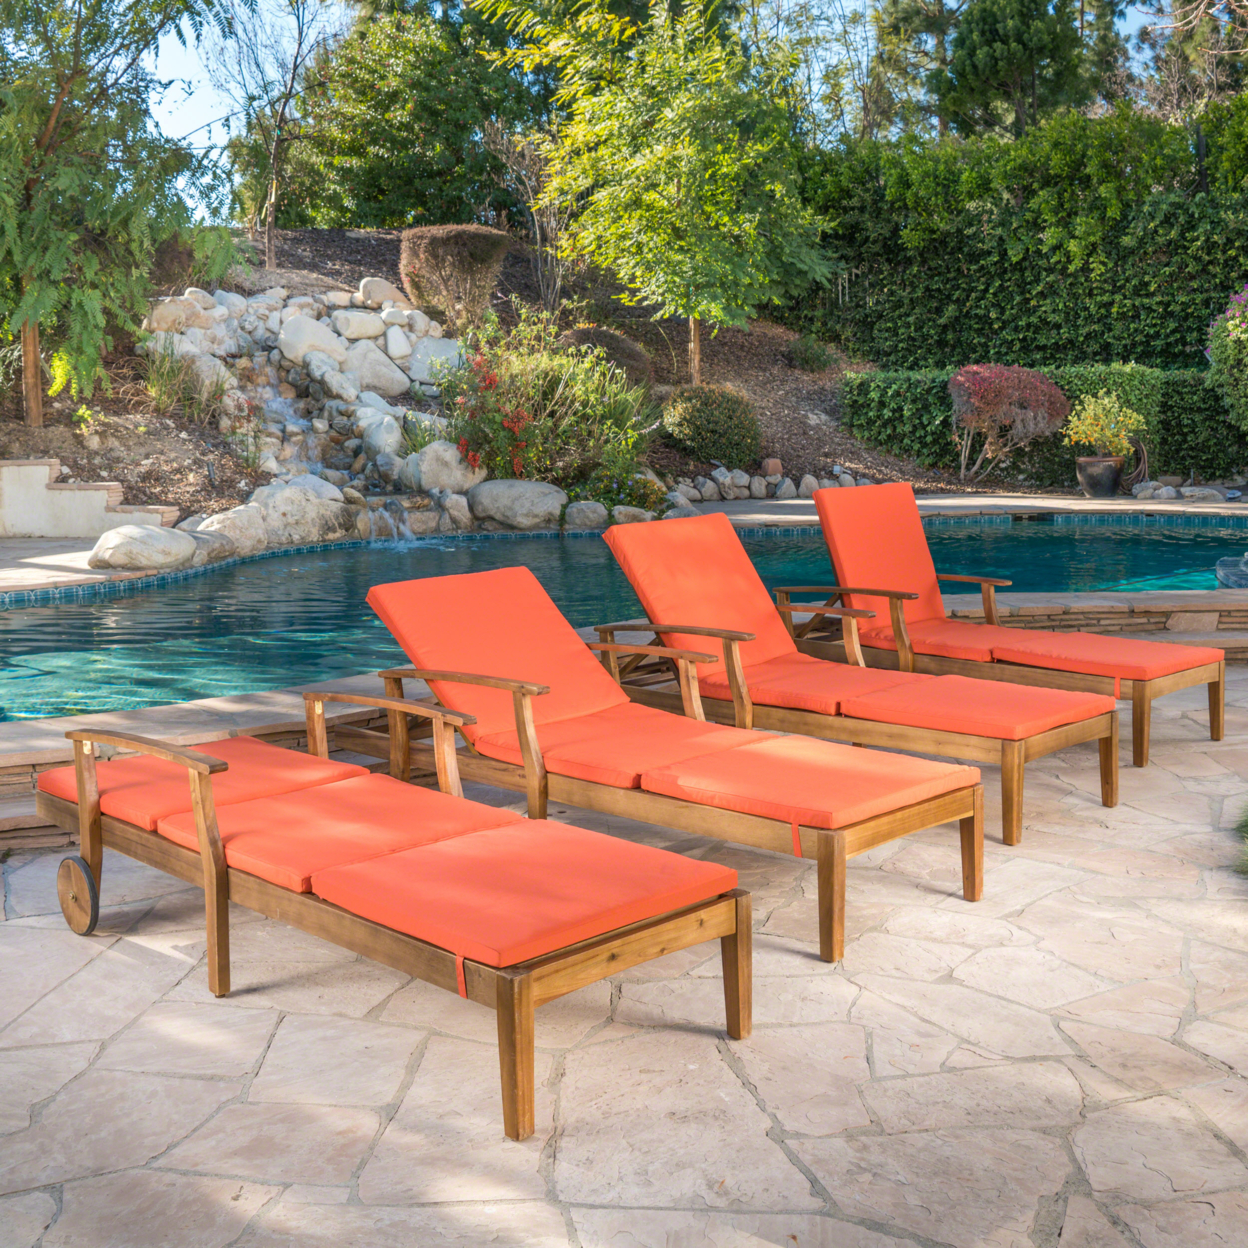 Daisy Outdoor Teak Finish Chaise Lounge With Water Resistant Cushion - Orange, Set Of 4